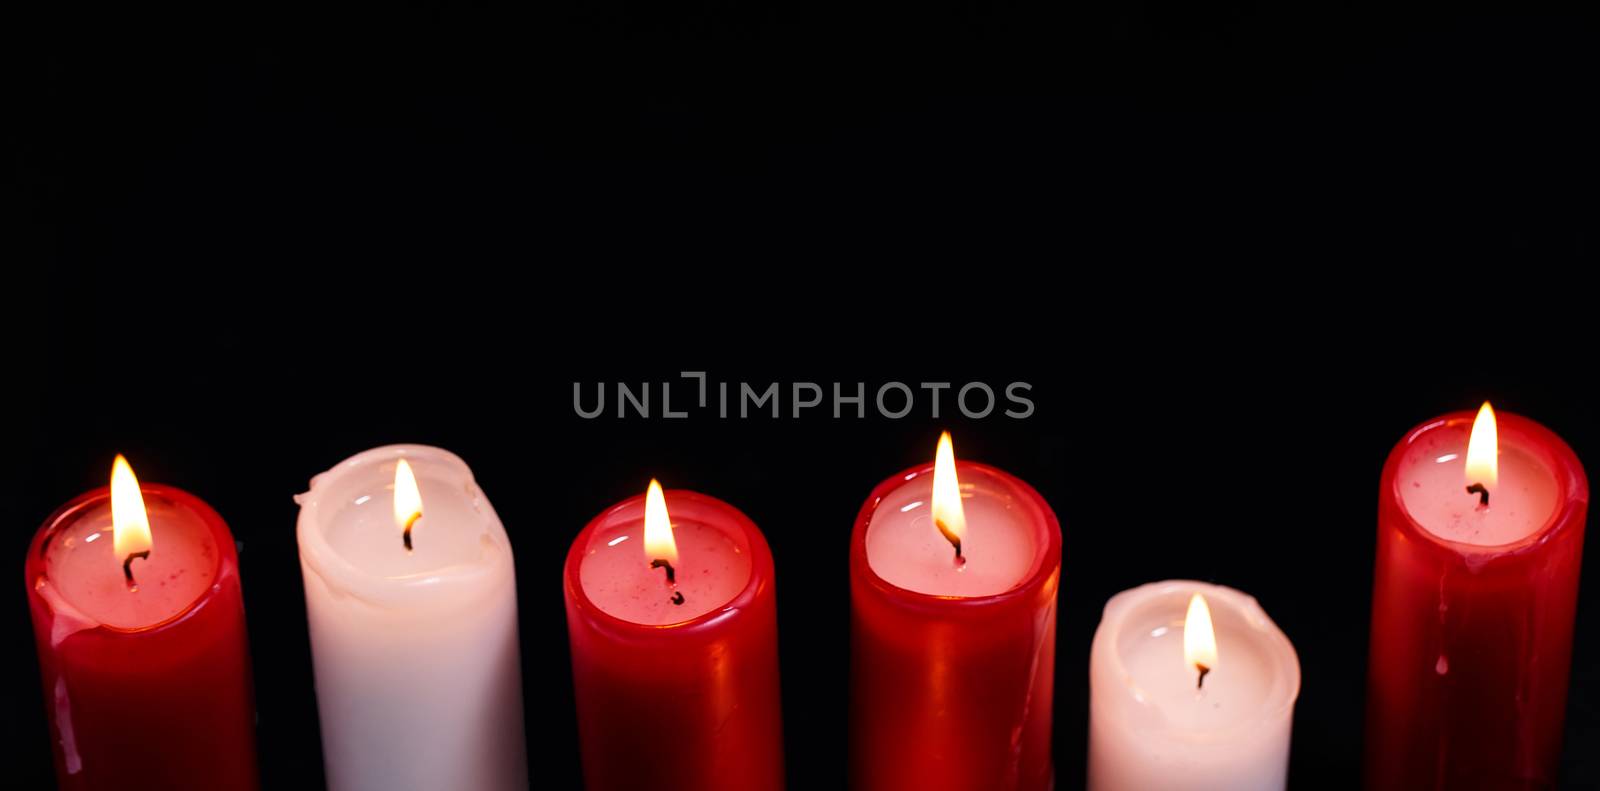 Candles on a black background